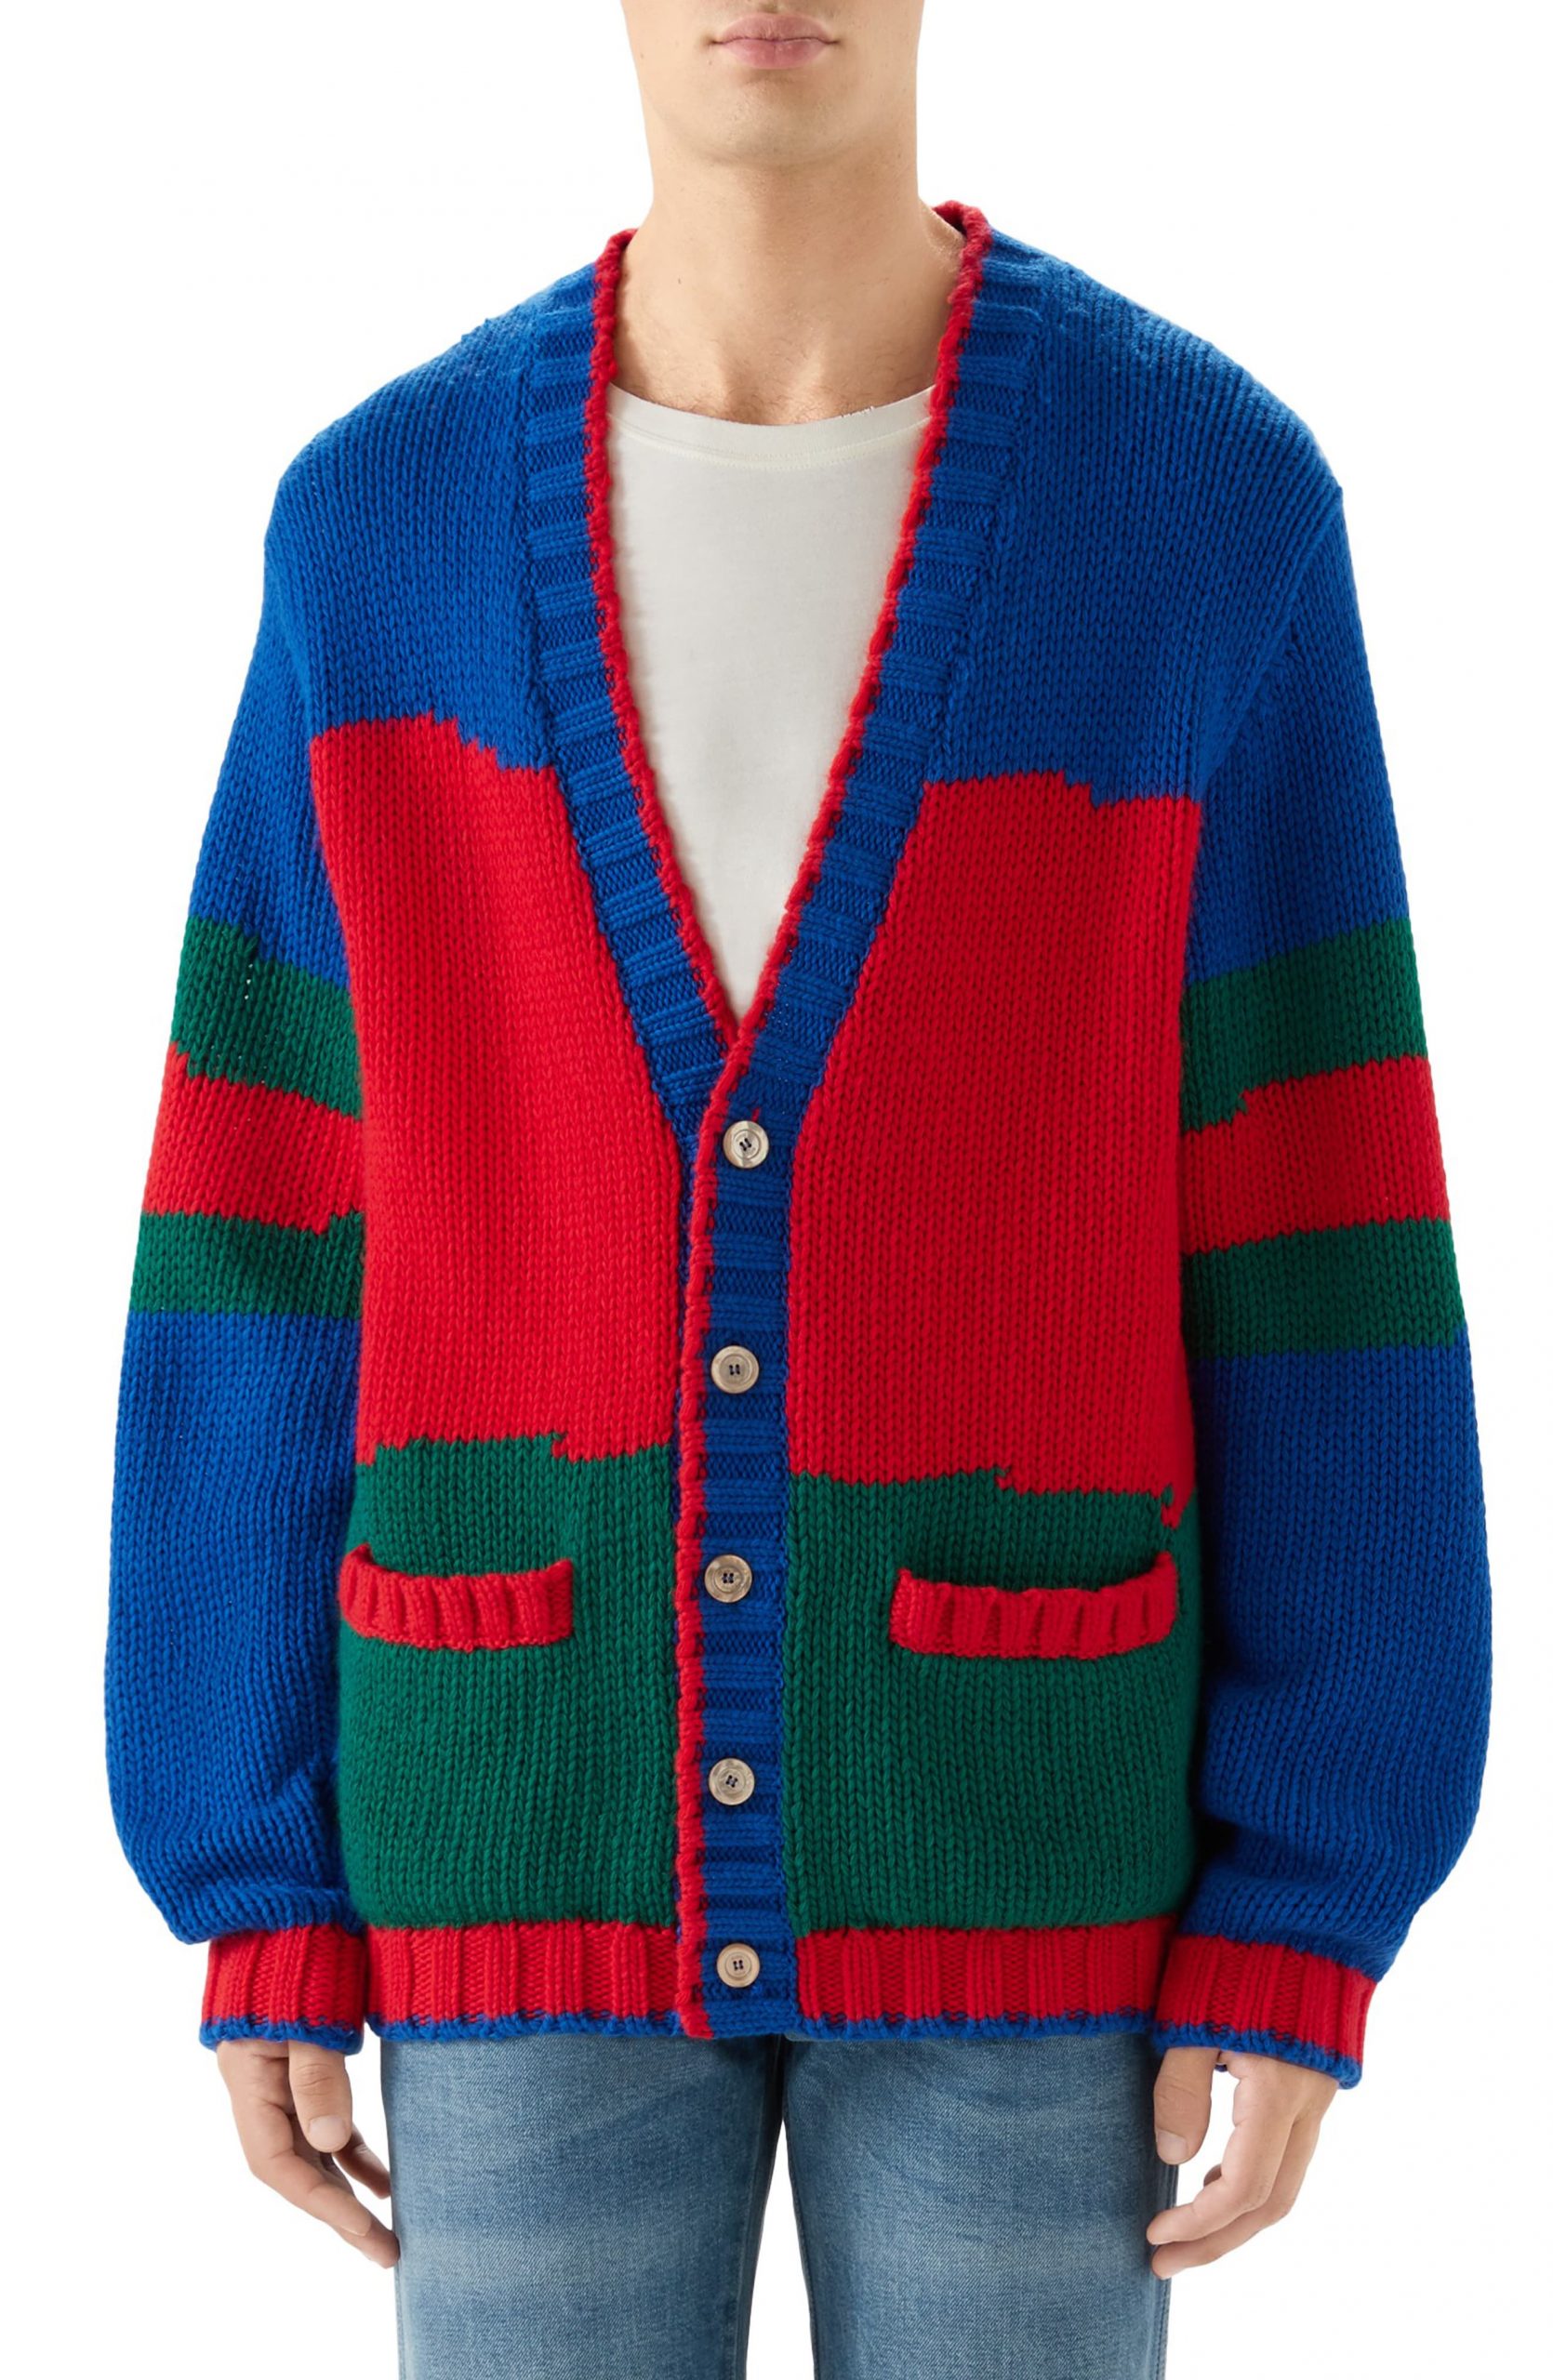  Men  s Gucci Oversize Colorblock Wool Cardigan  Size Small 